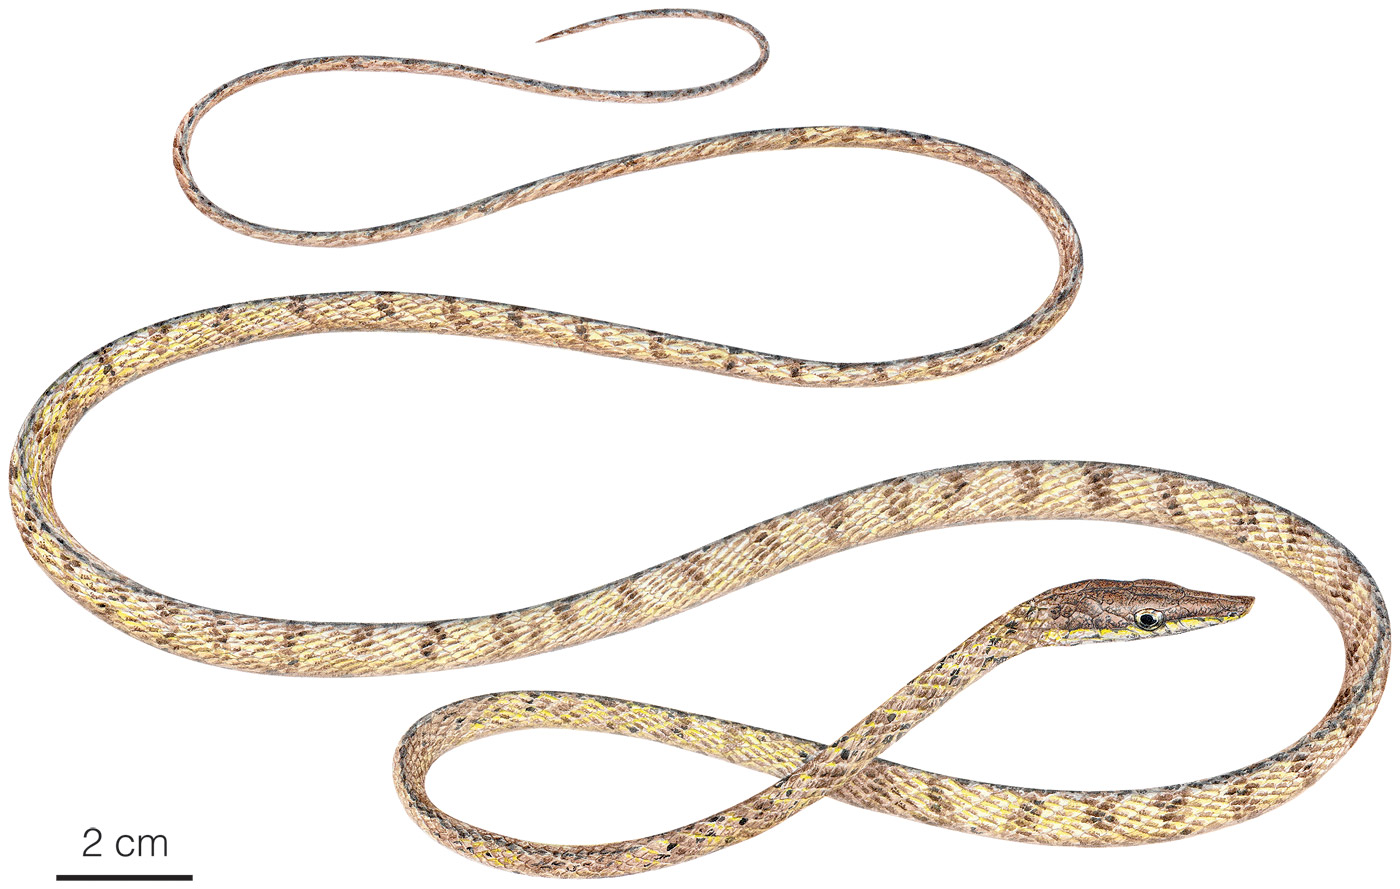 Illustration of an adult male of Oxybelis inkaterra